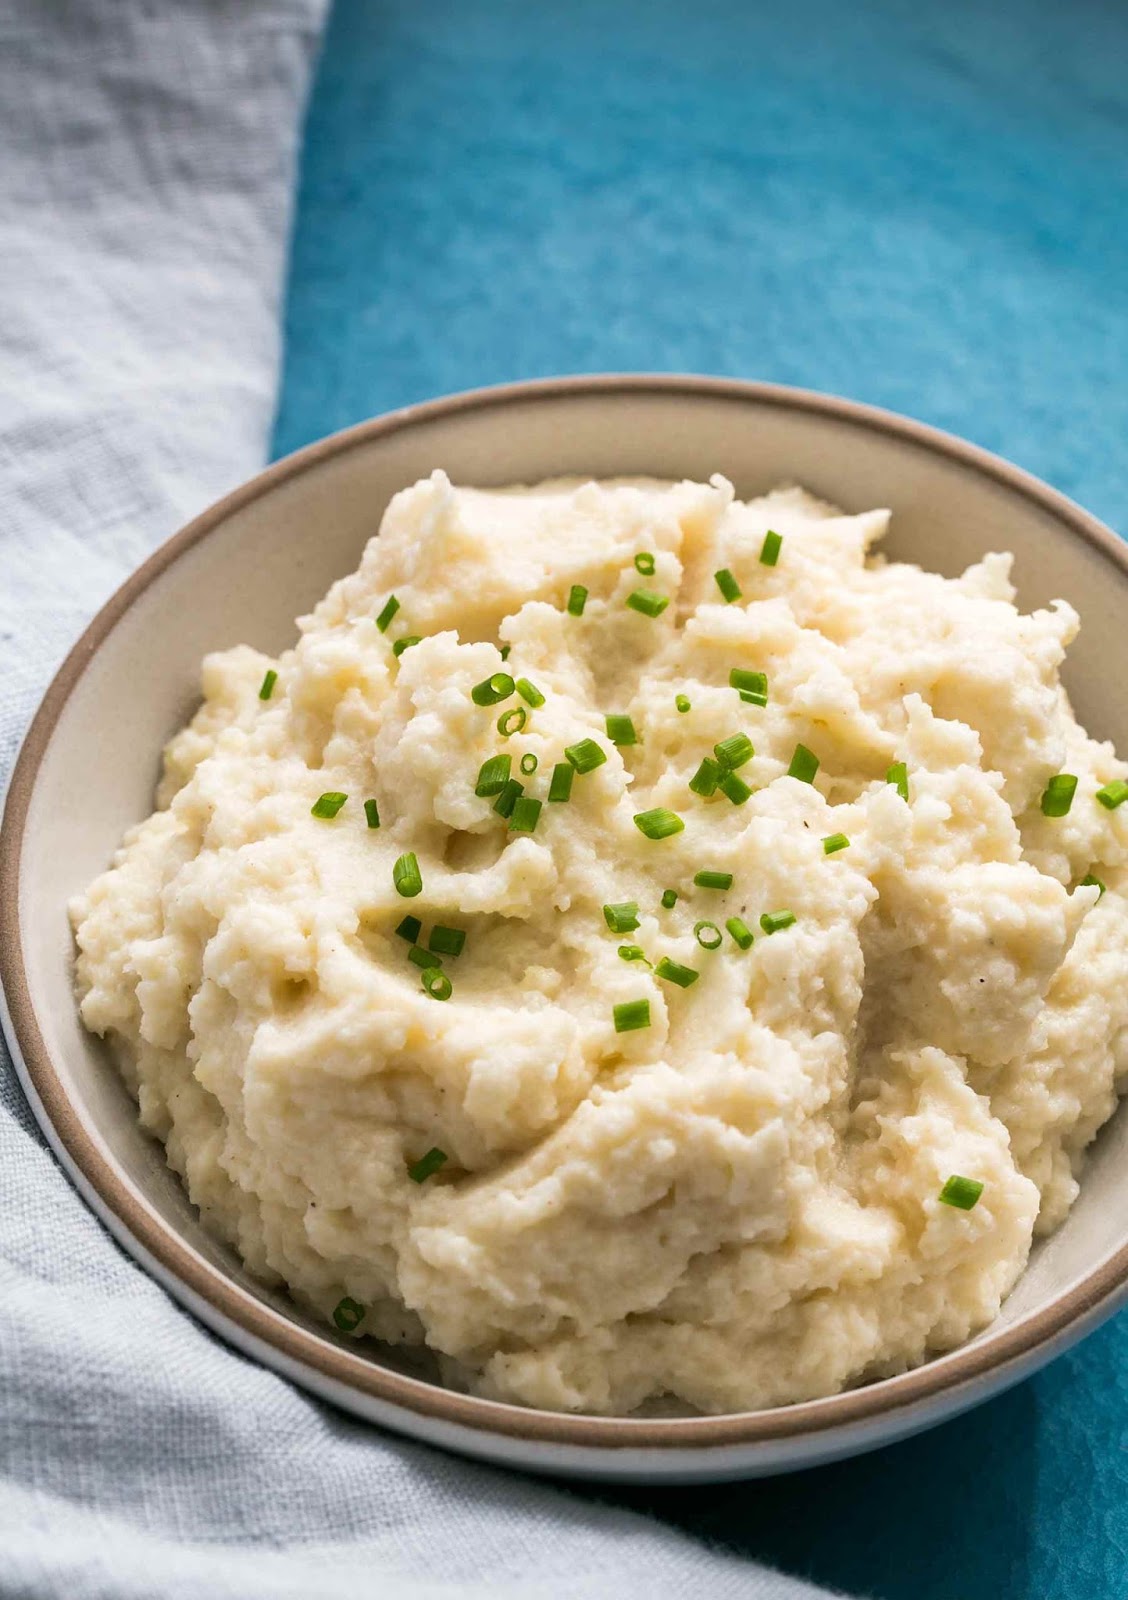 Mama's Cuisine Menu: Cauliflower Mashed “Potatoes” with Browned Butter